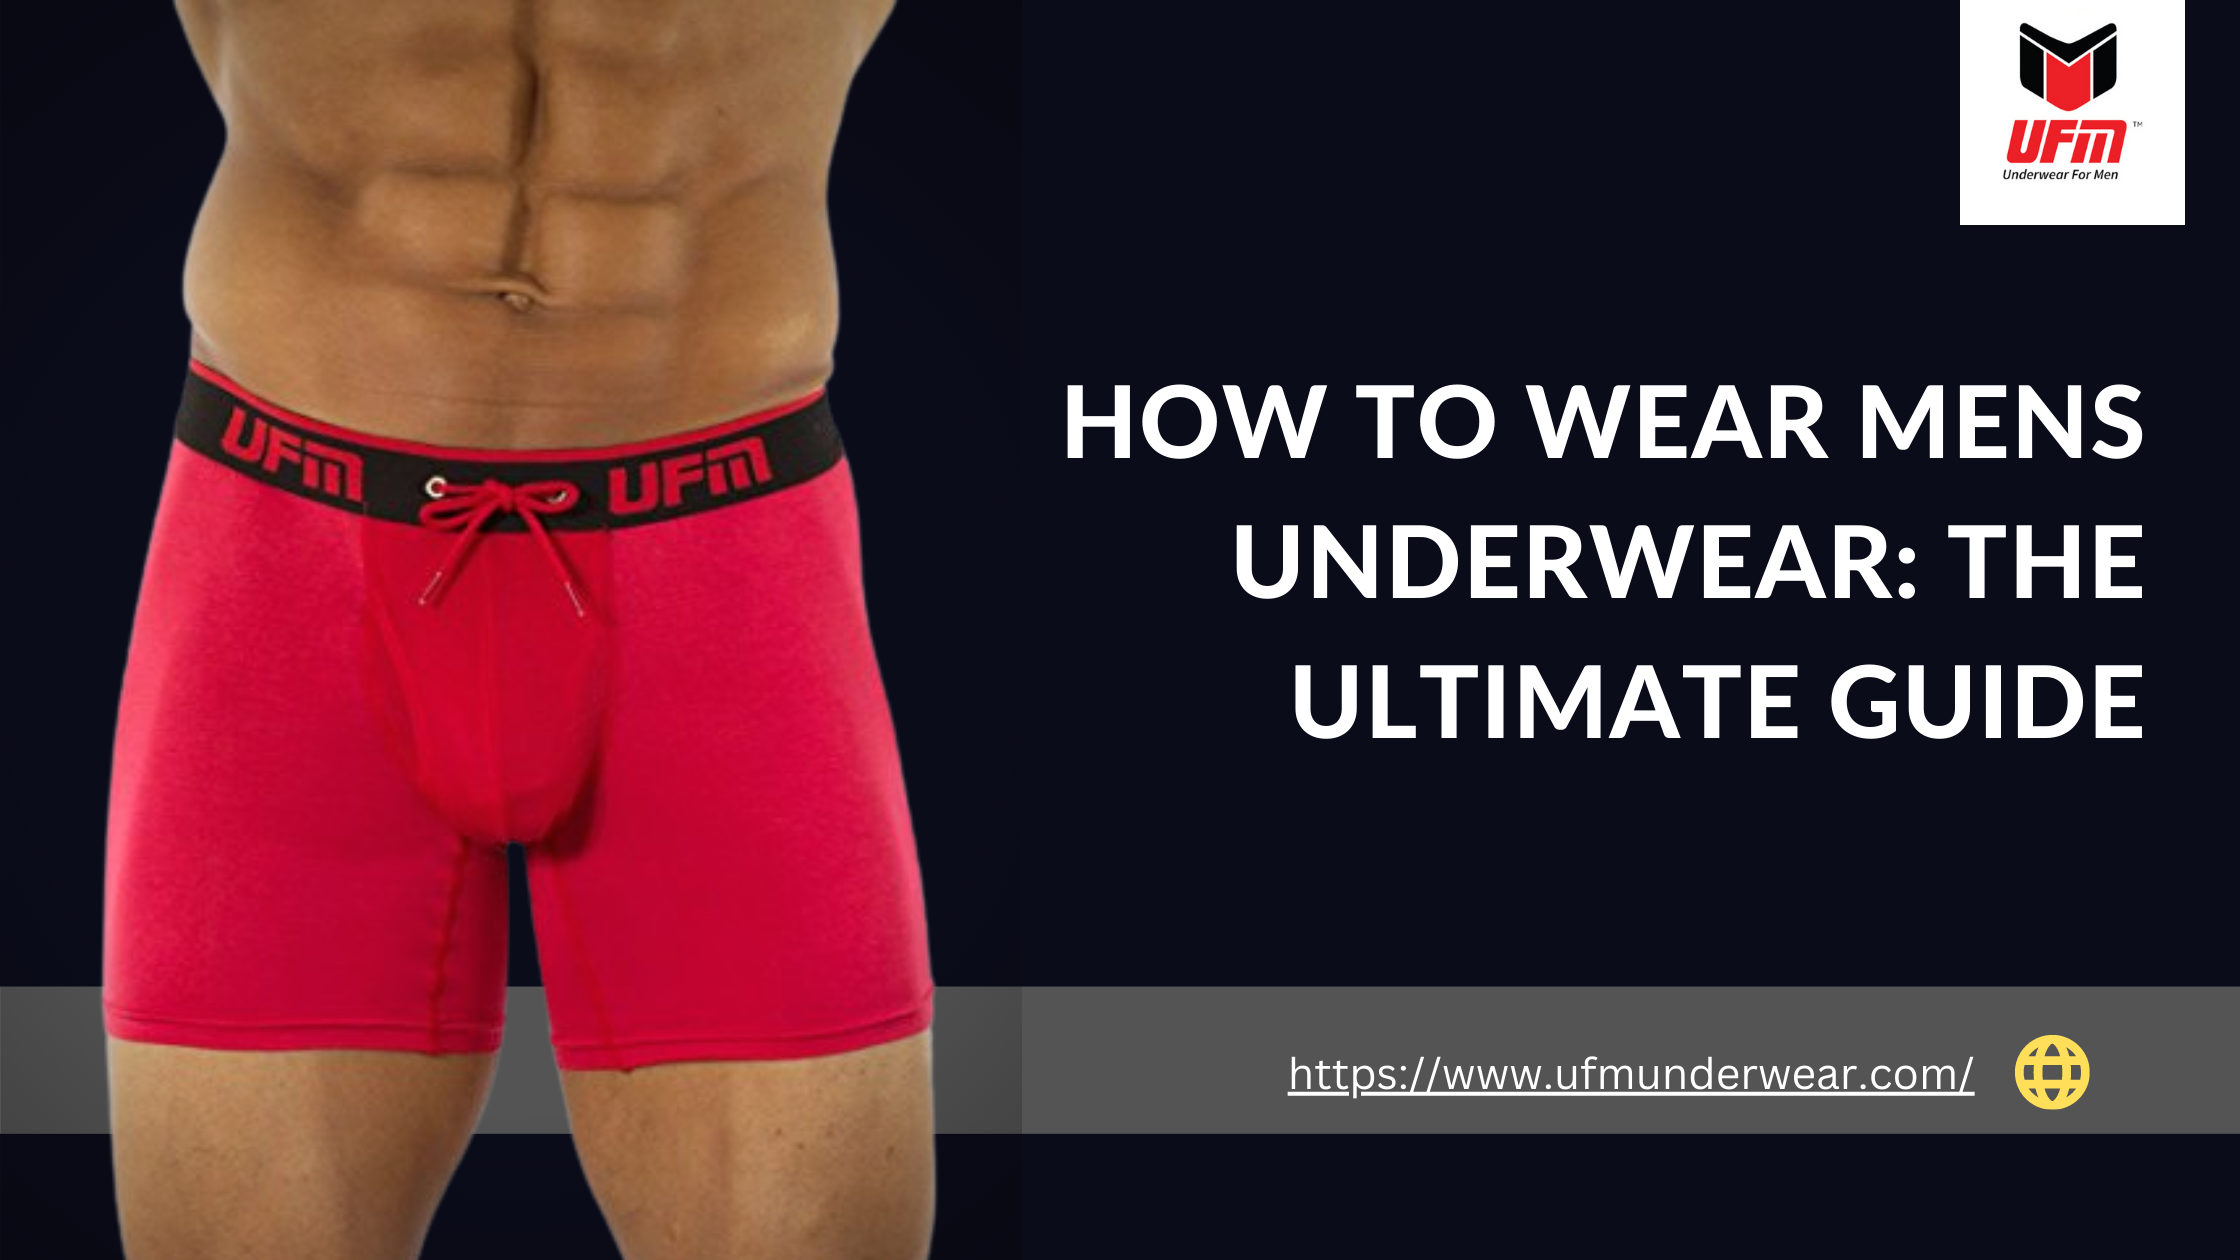 An extra advice! If you're wearing underwear go with something really